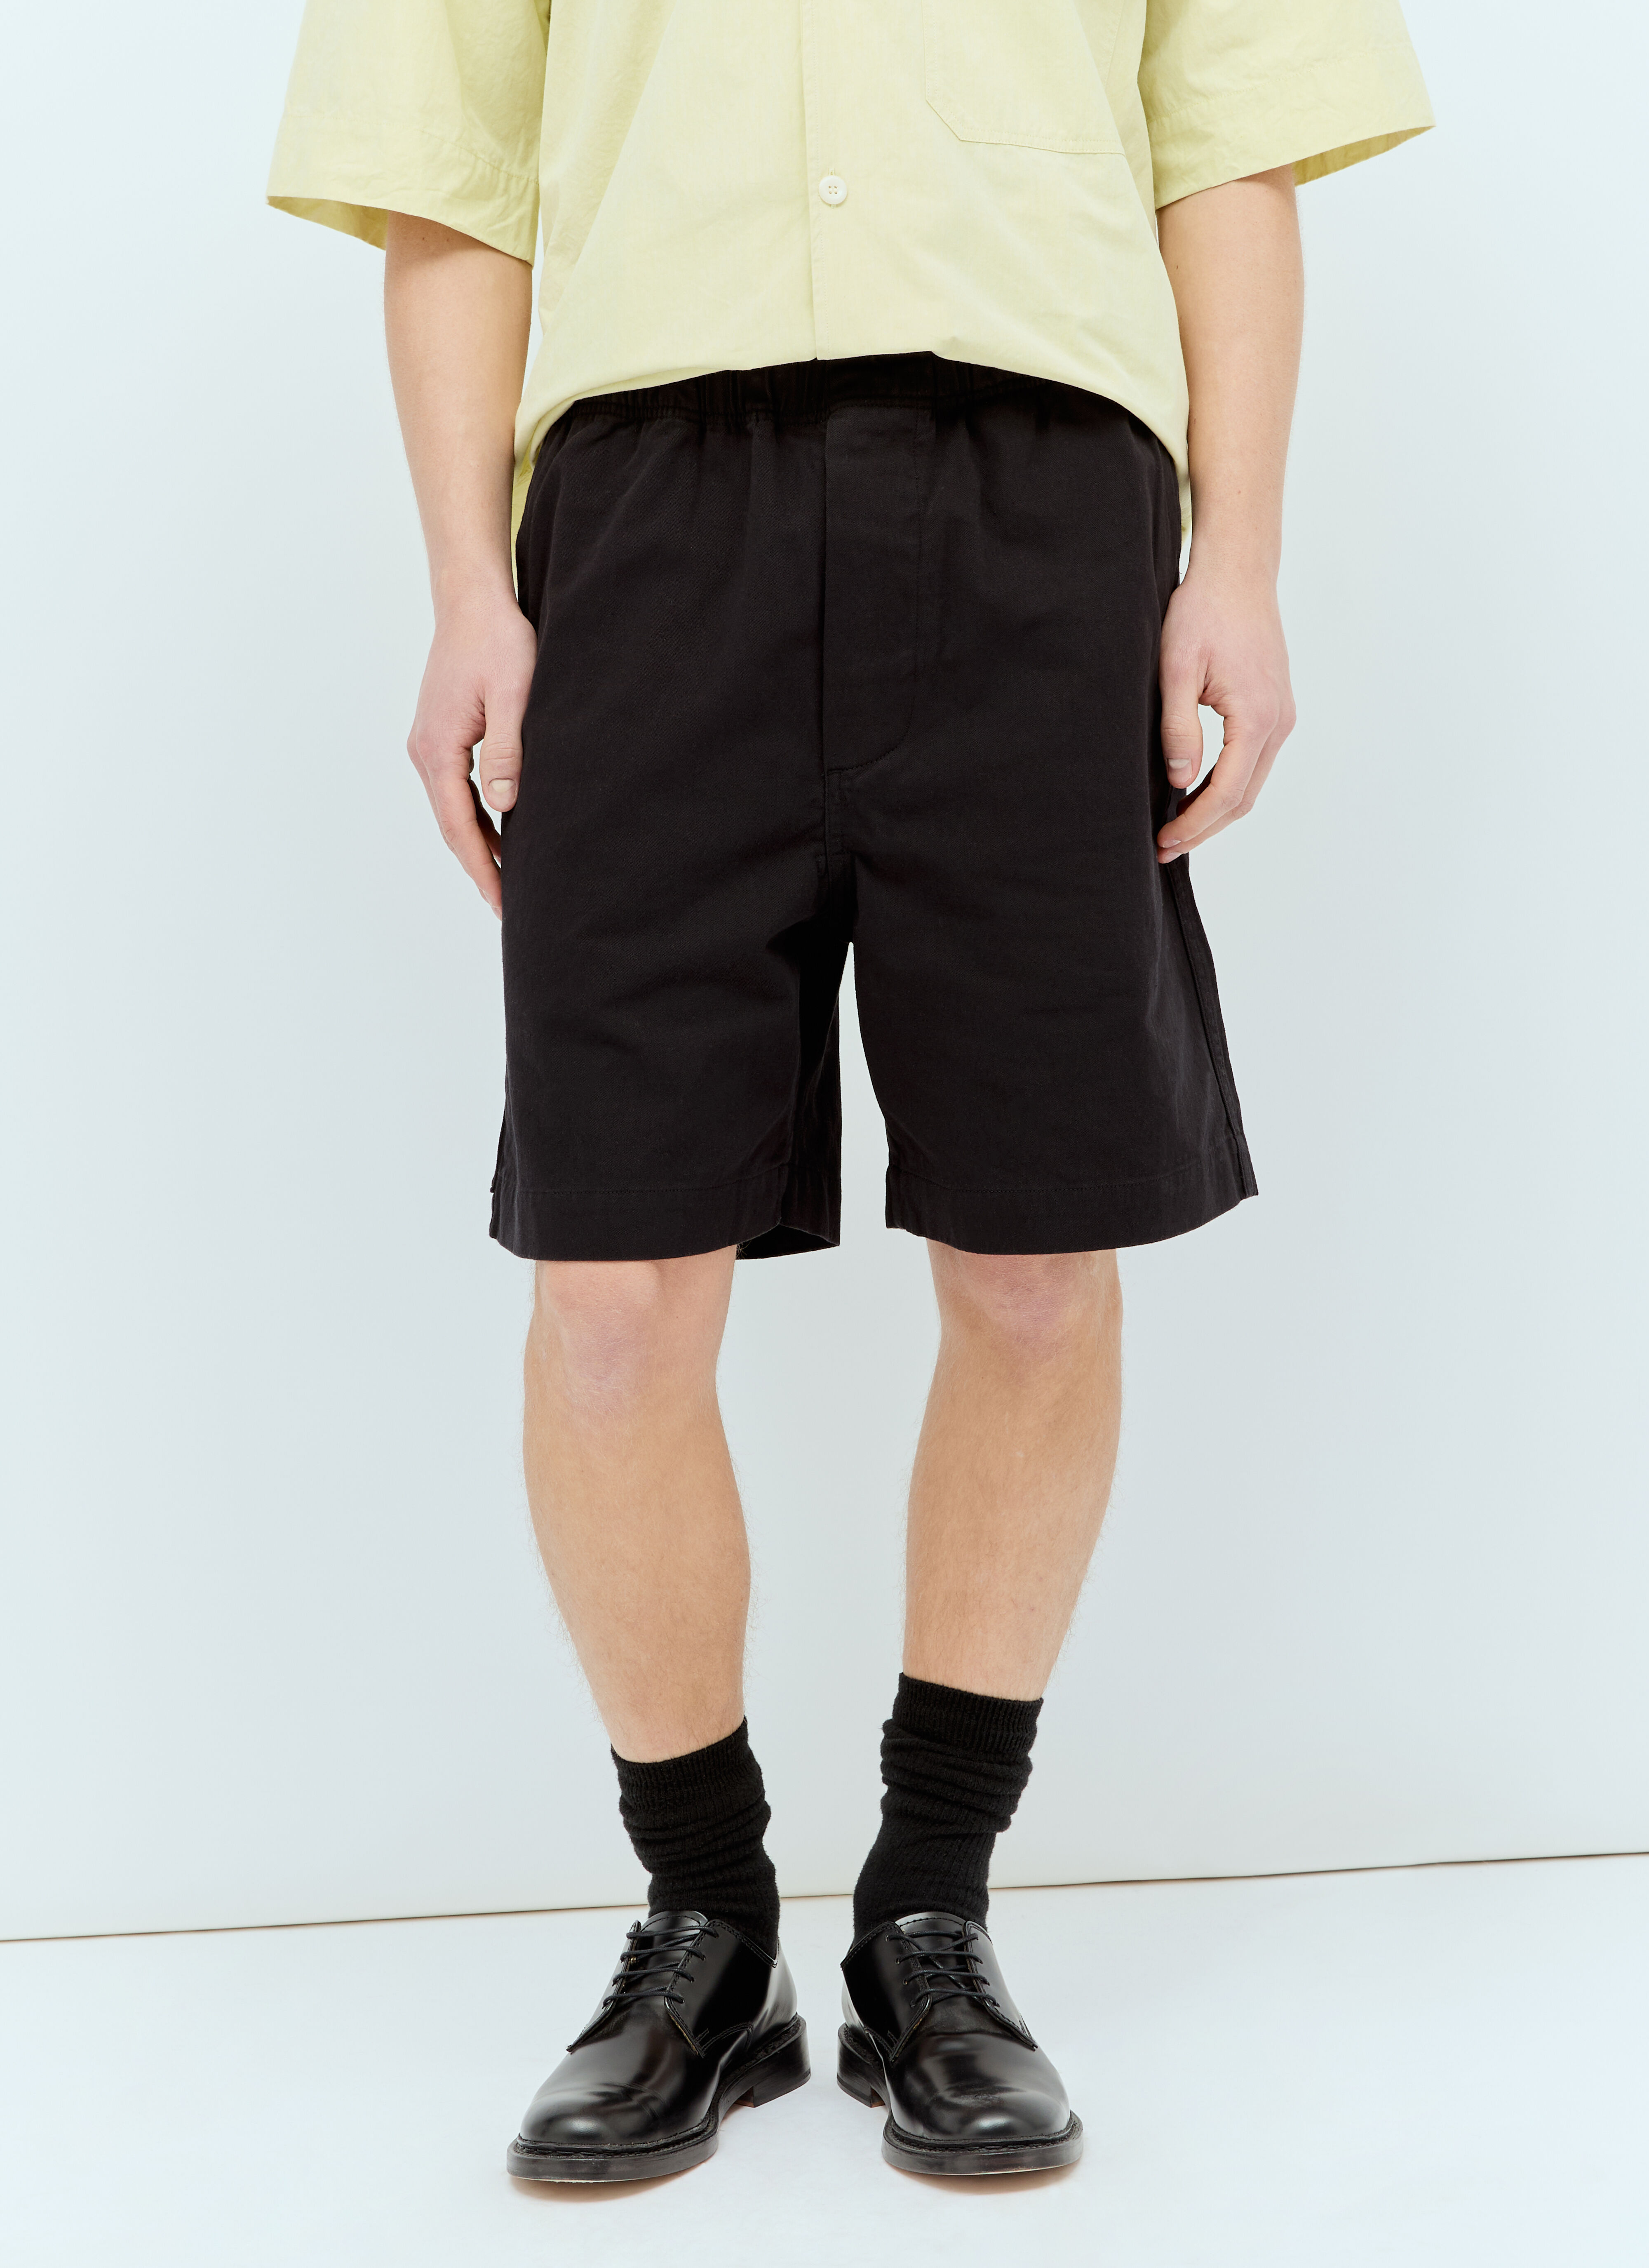 MHL by Margaret Howell Pull-Up Shorts Black mhl0156009